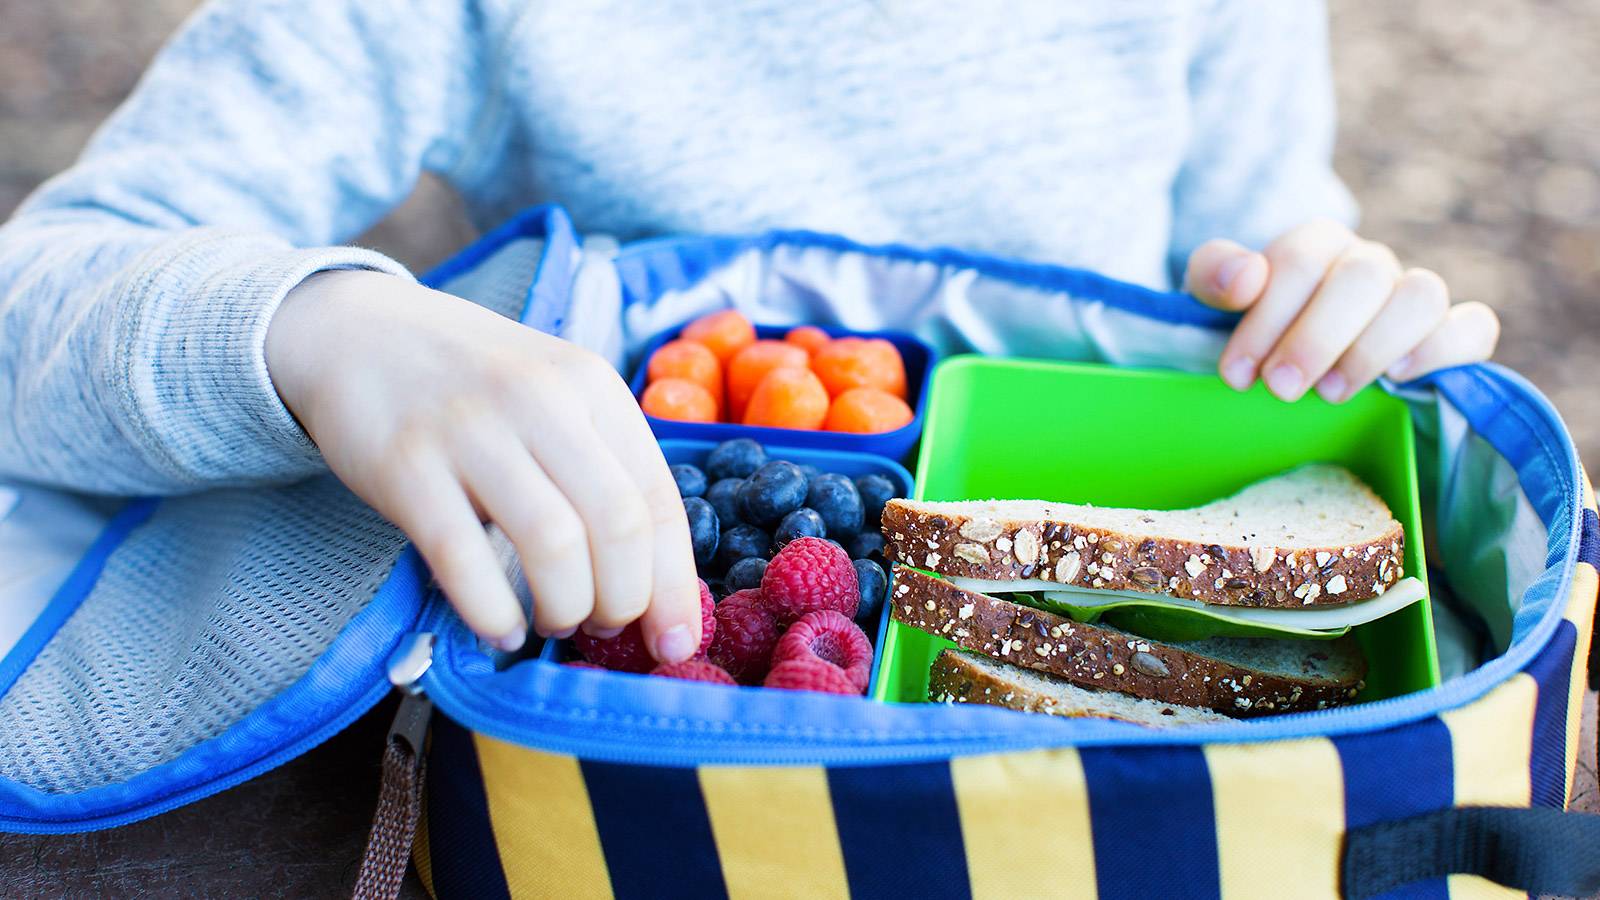 BUYER’S GUIDE 6 great lunch boxes for tots